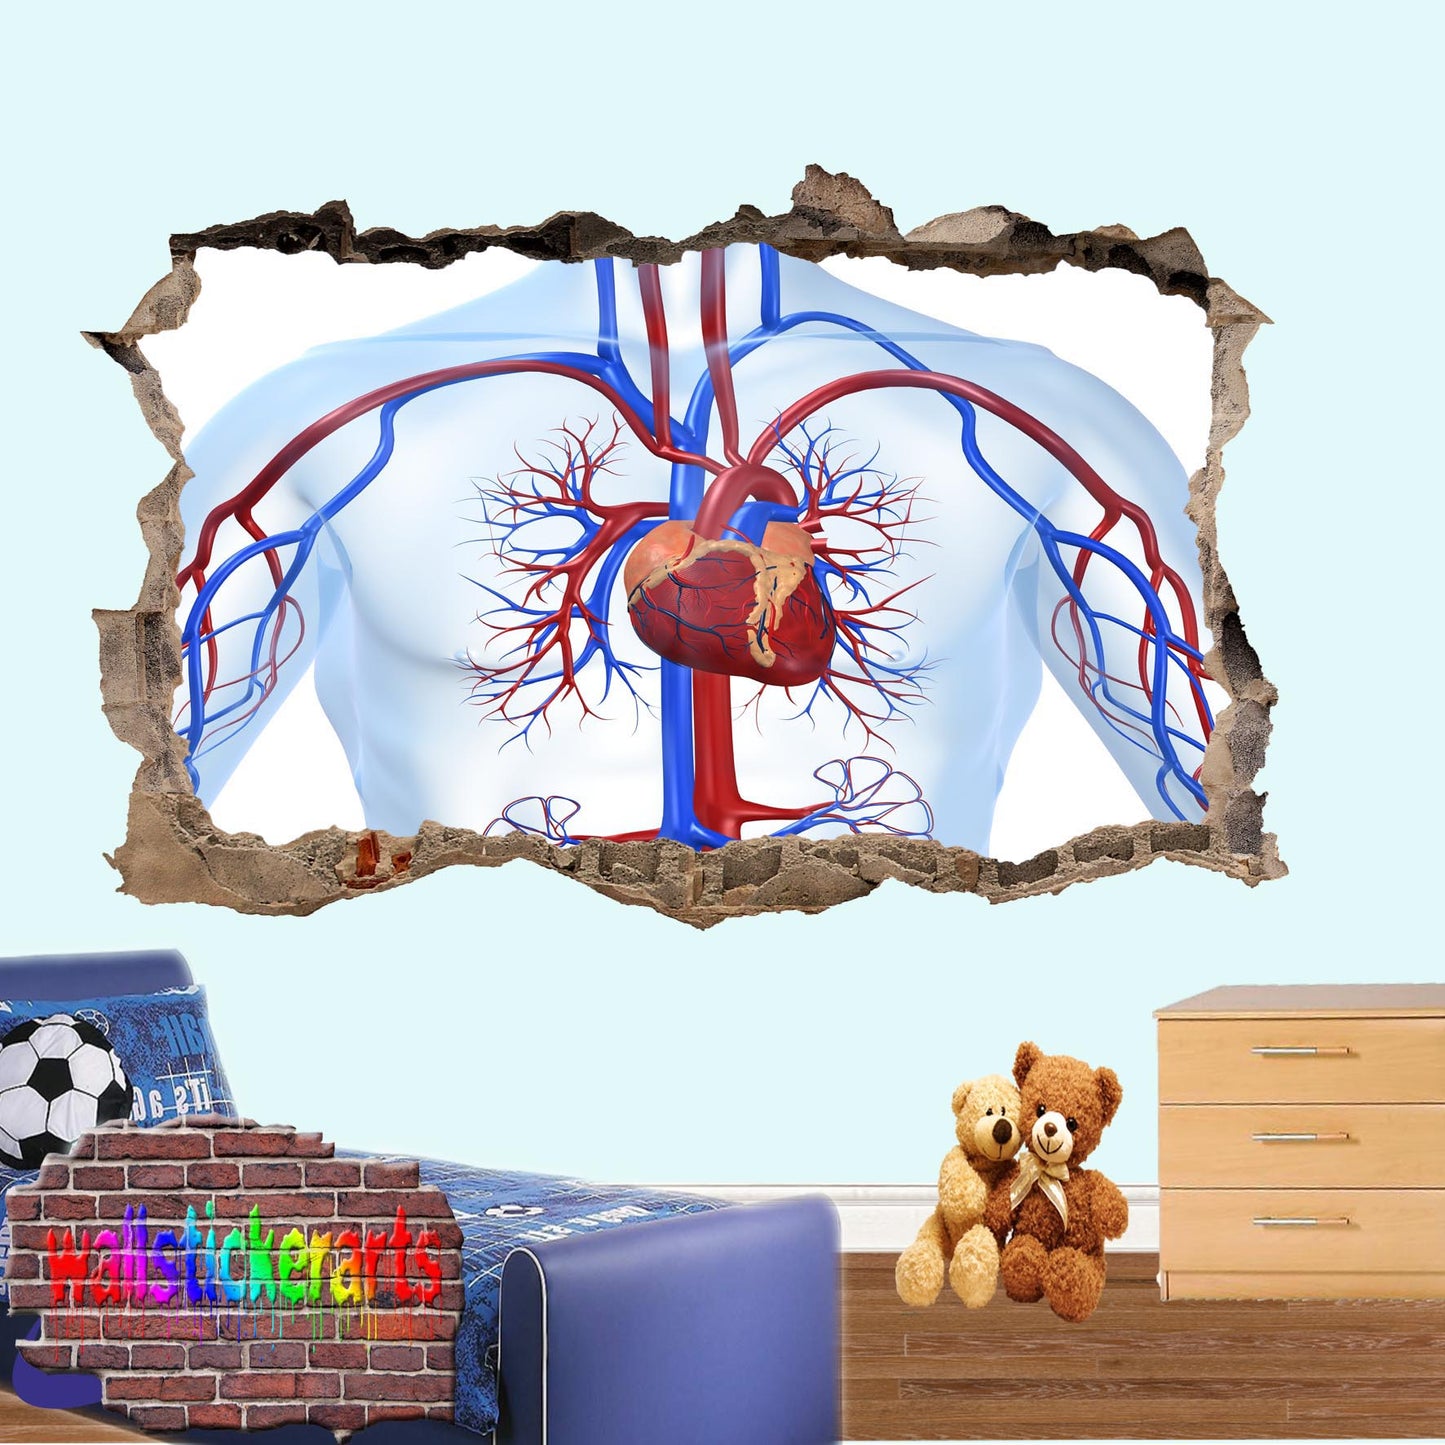 Biology Cardiovascular System Education 3d Art Smashed Effect Wall Sticker Room Office Nursery Shop Decoration Decal Mural ZY9